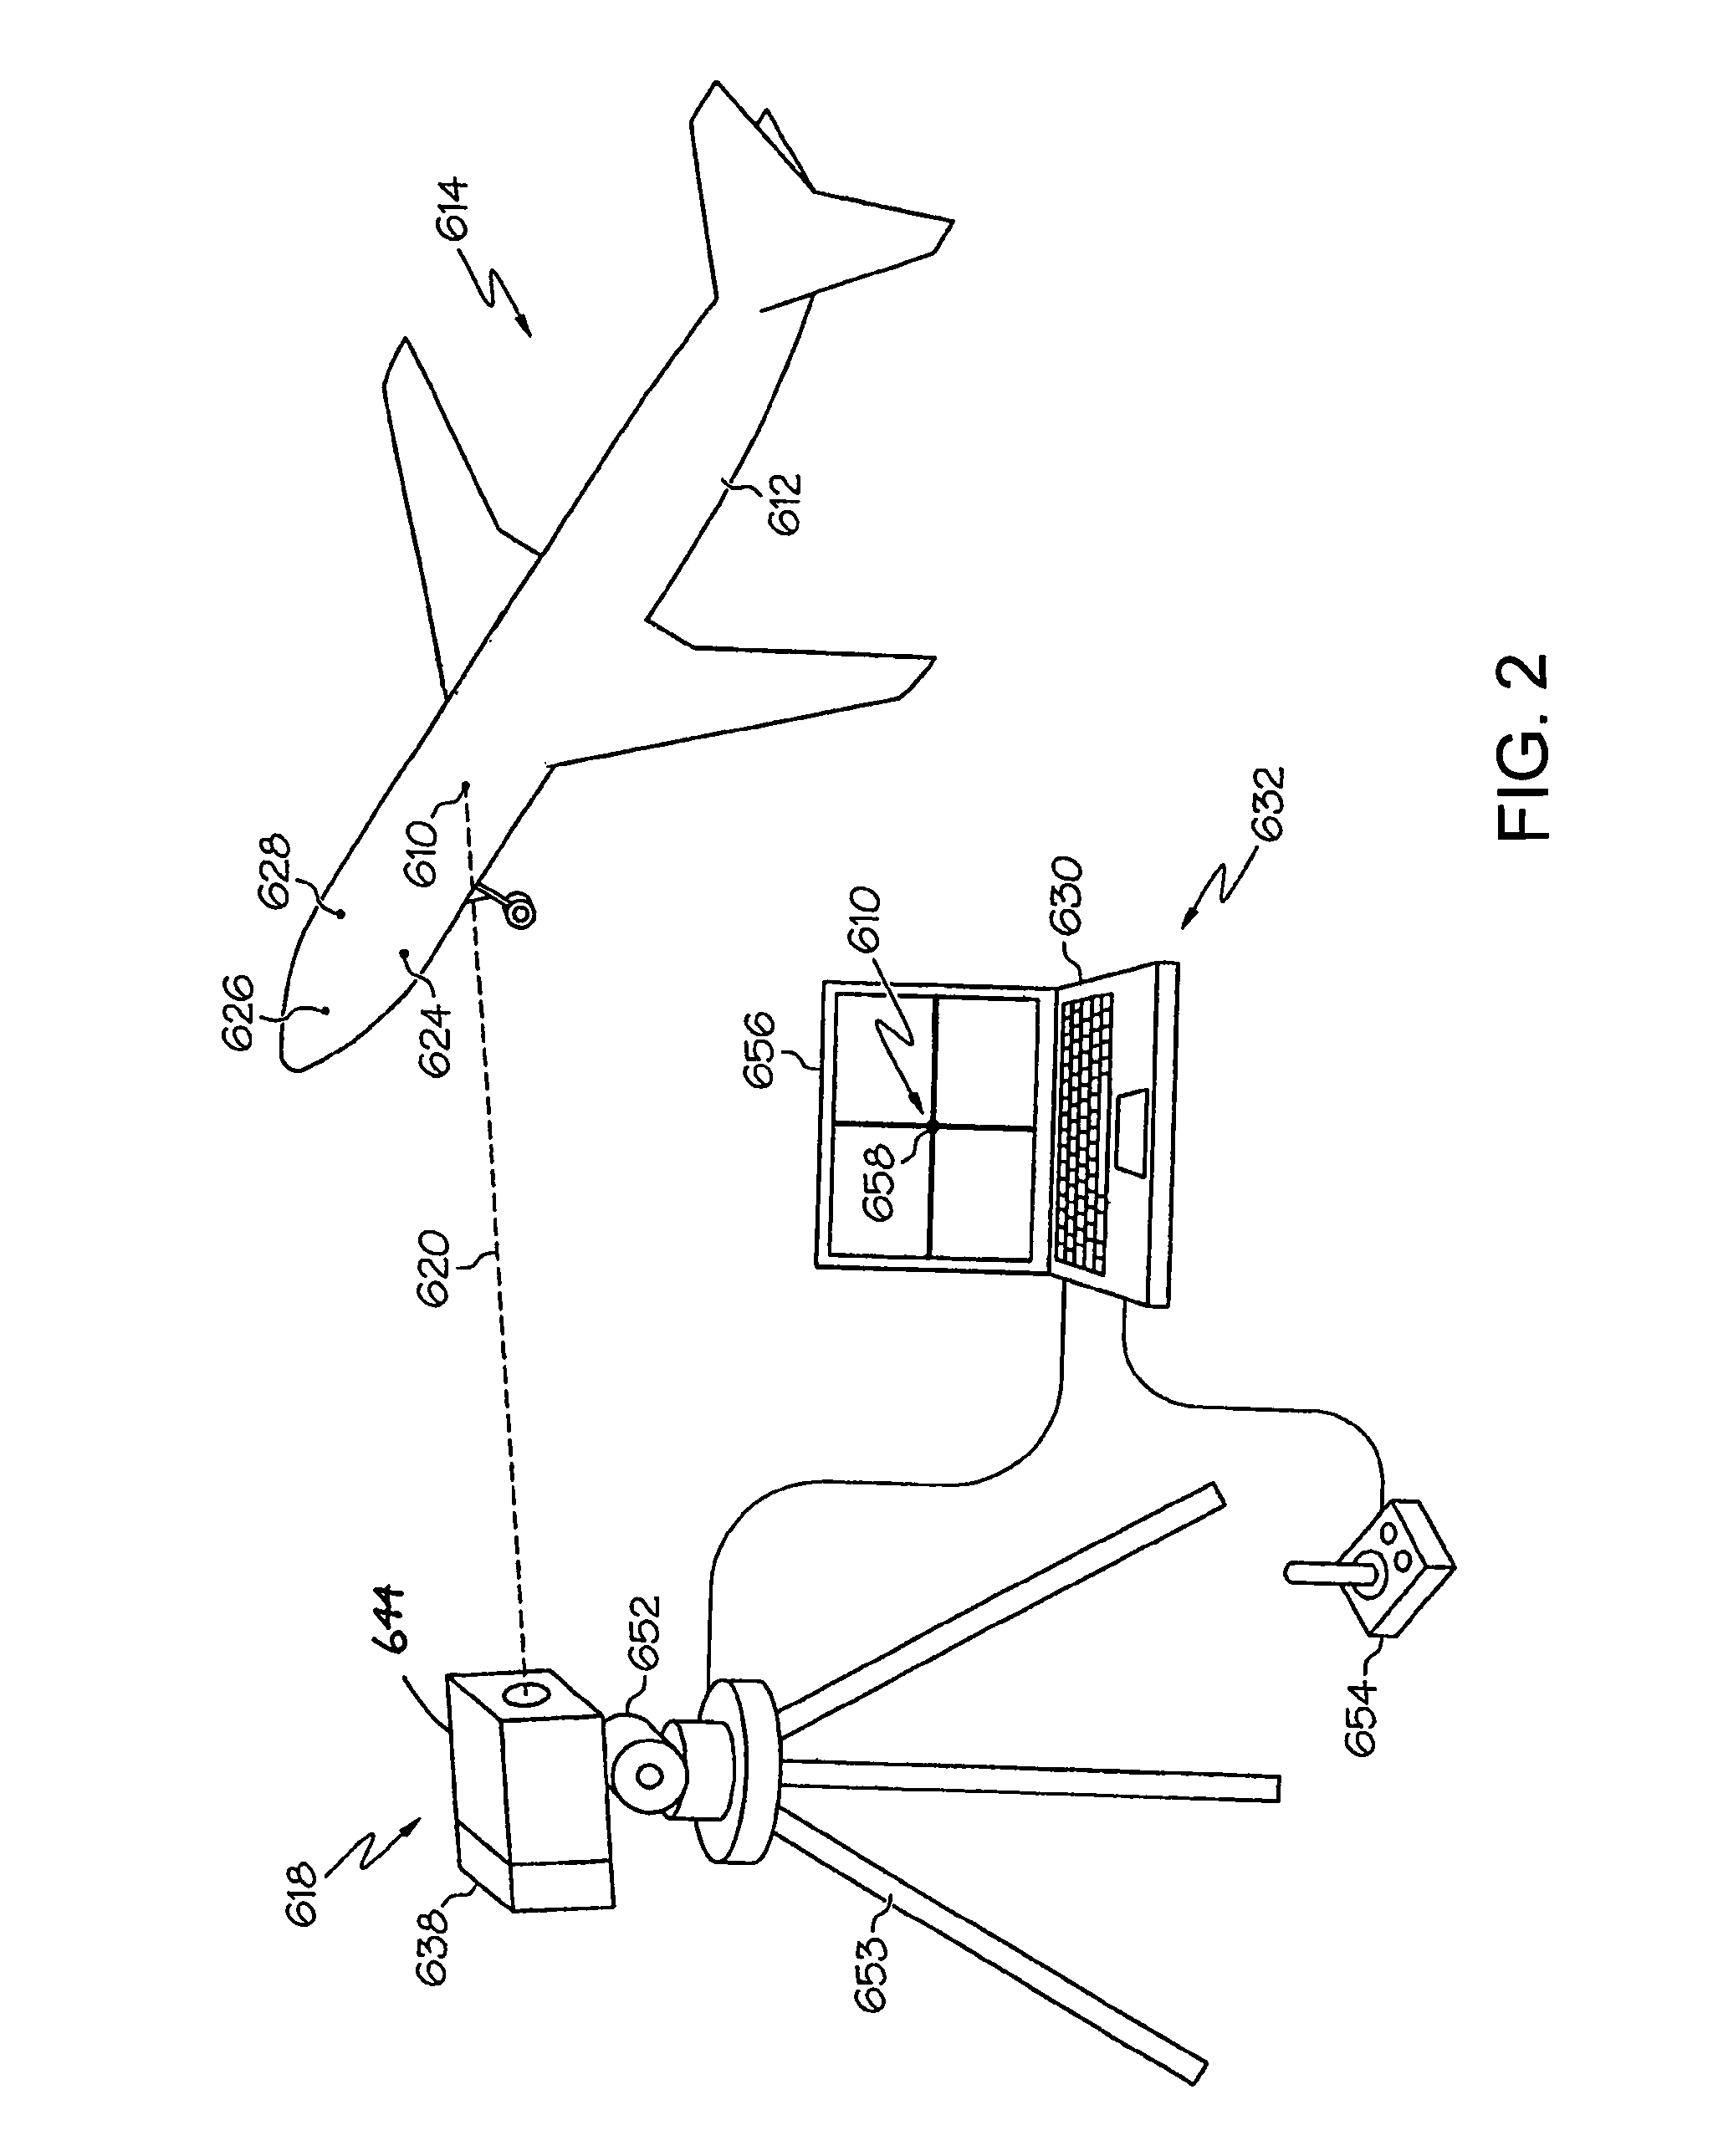 Systems and methods for stand-off inspection of aircraft structures